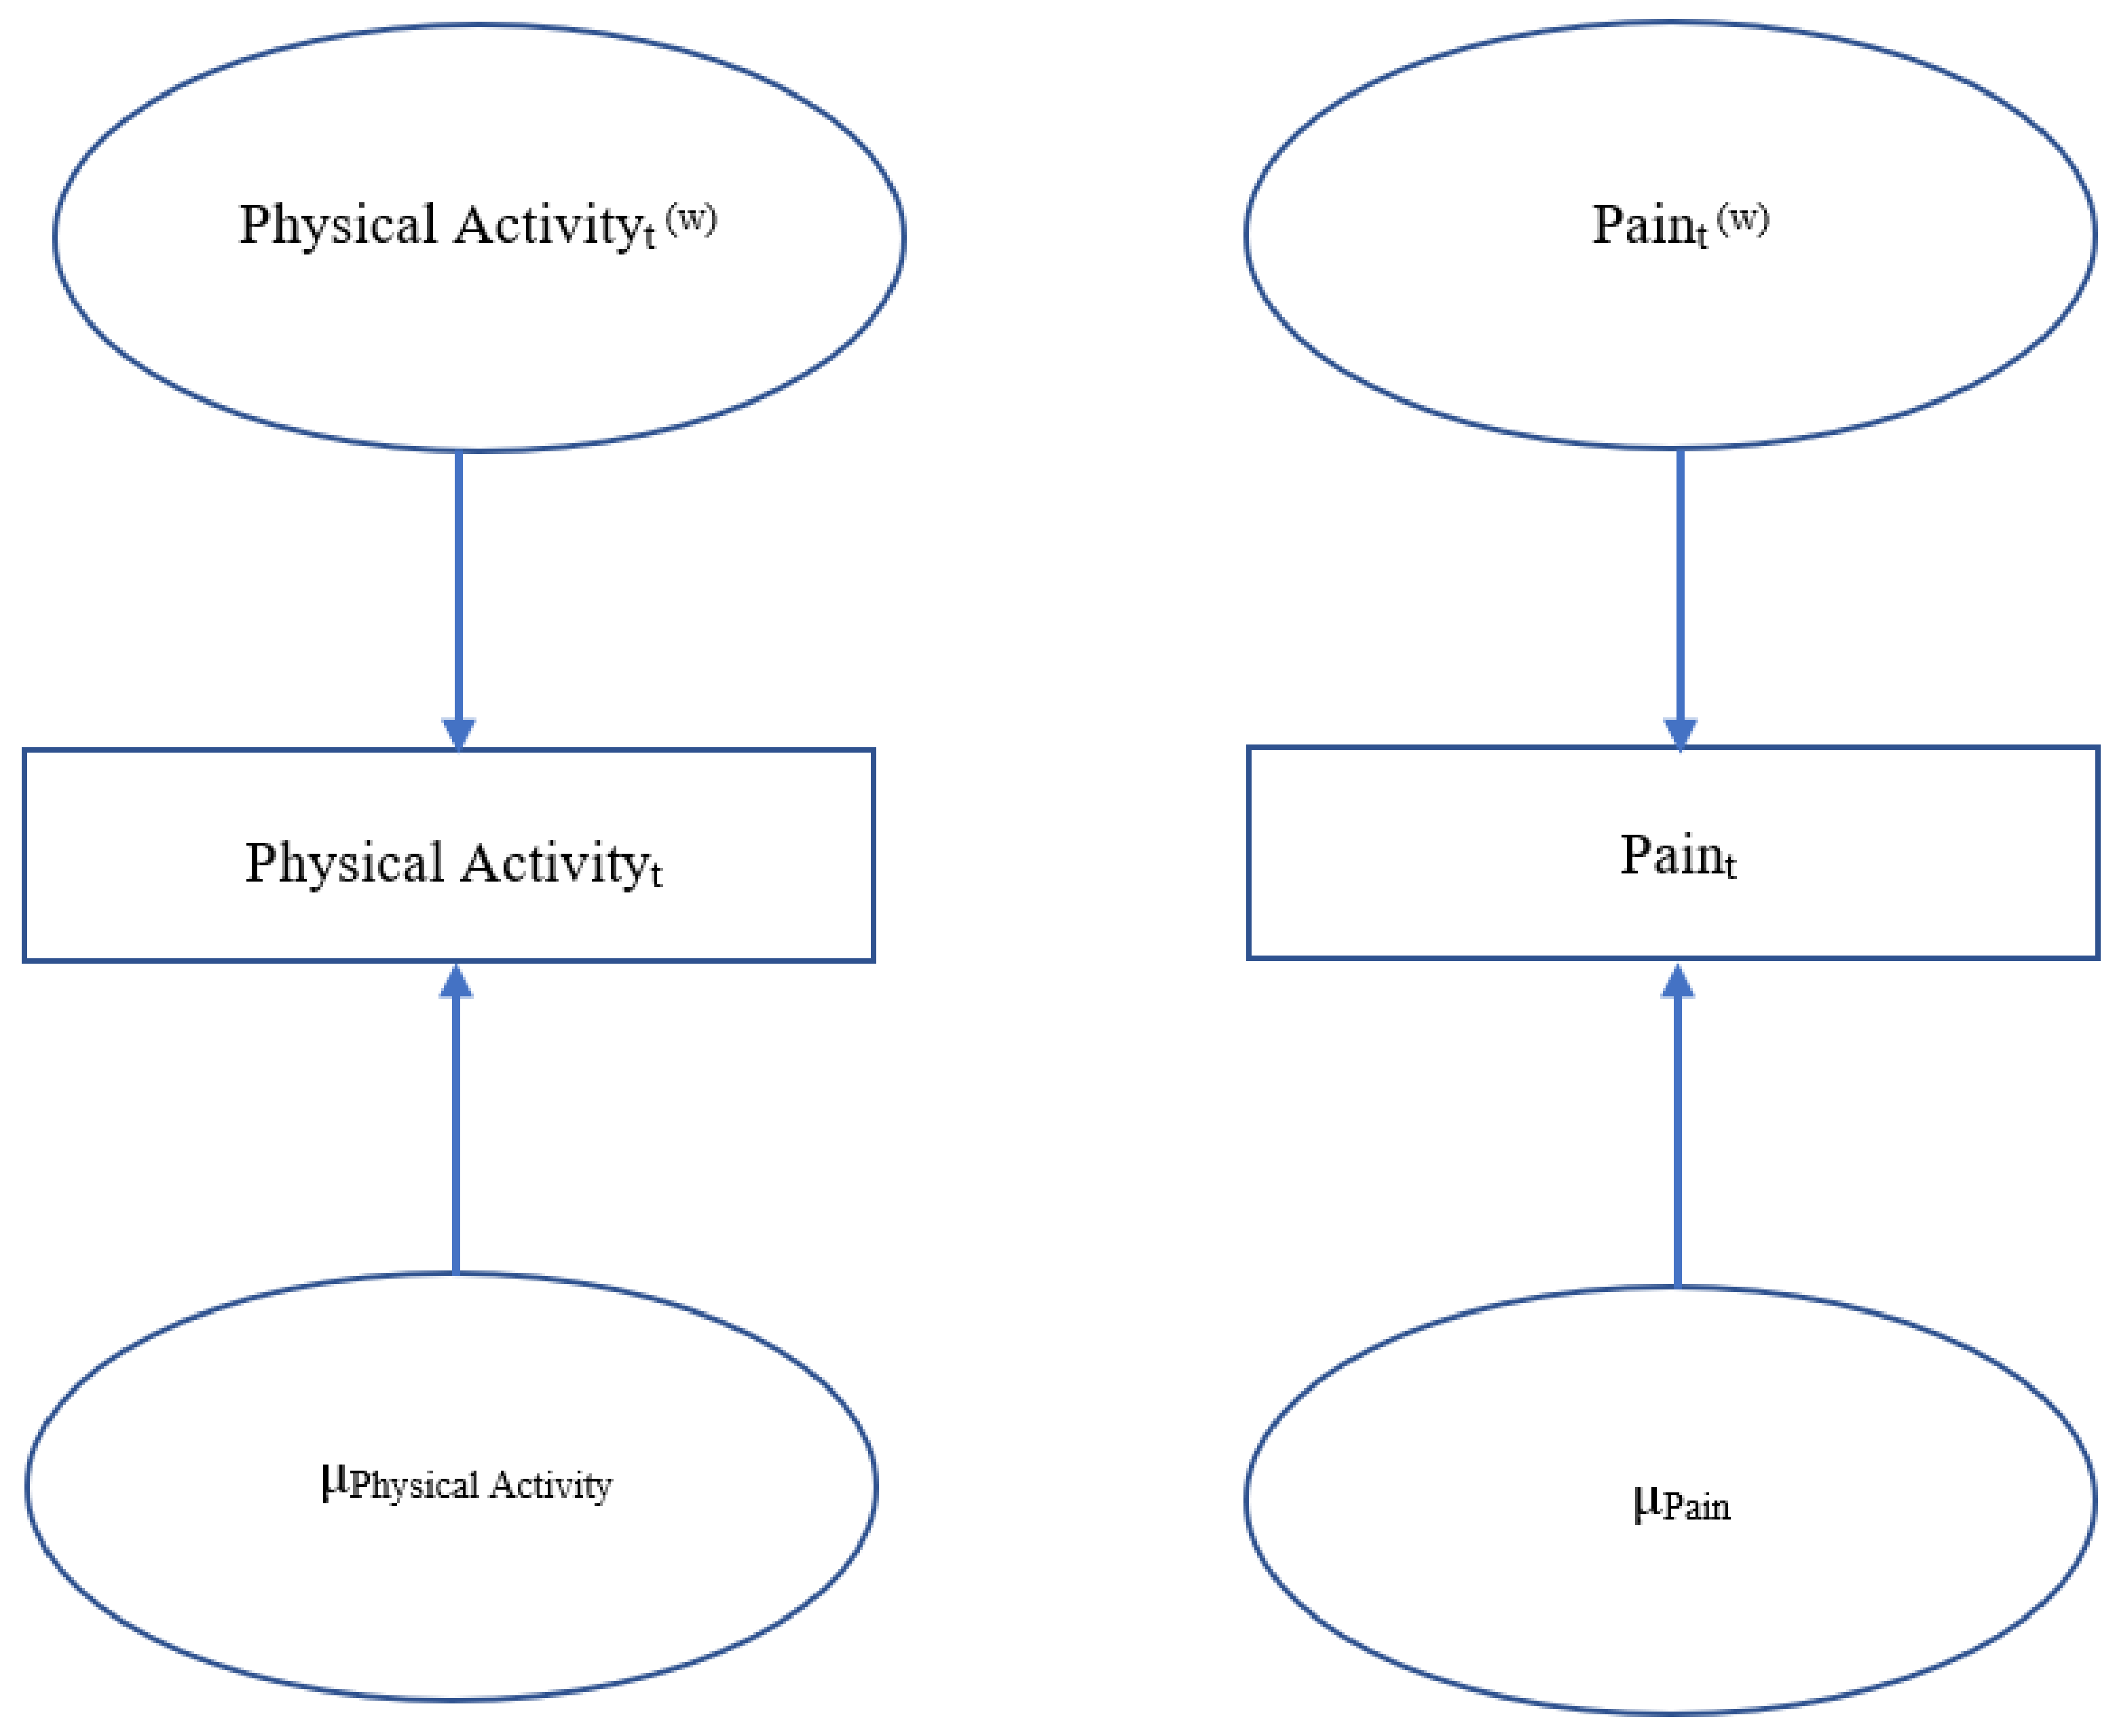 Children | Free Full-Text | Using Technology to Assess Bidirectionality  between Daily Pain and Physical Activity: The Role of Marginalization  during Emerging Adulthood